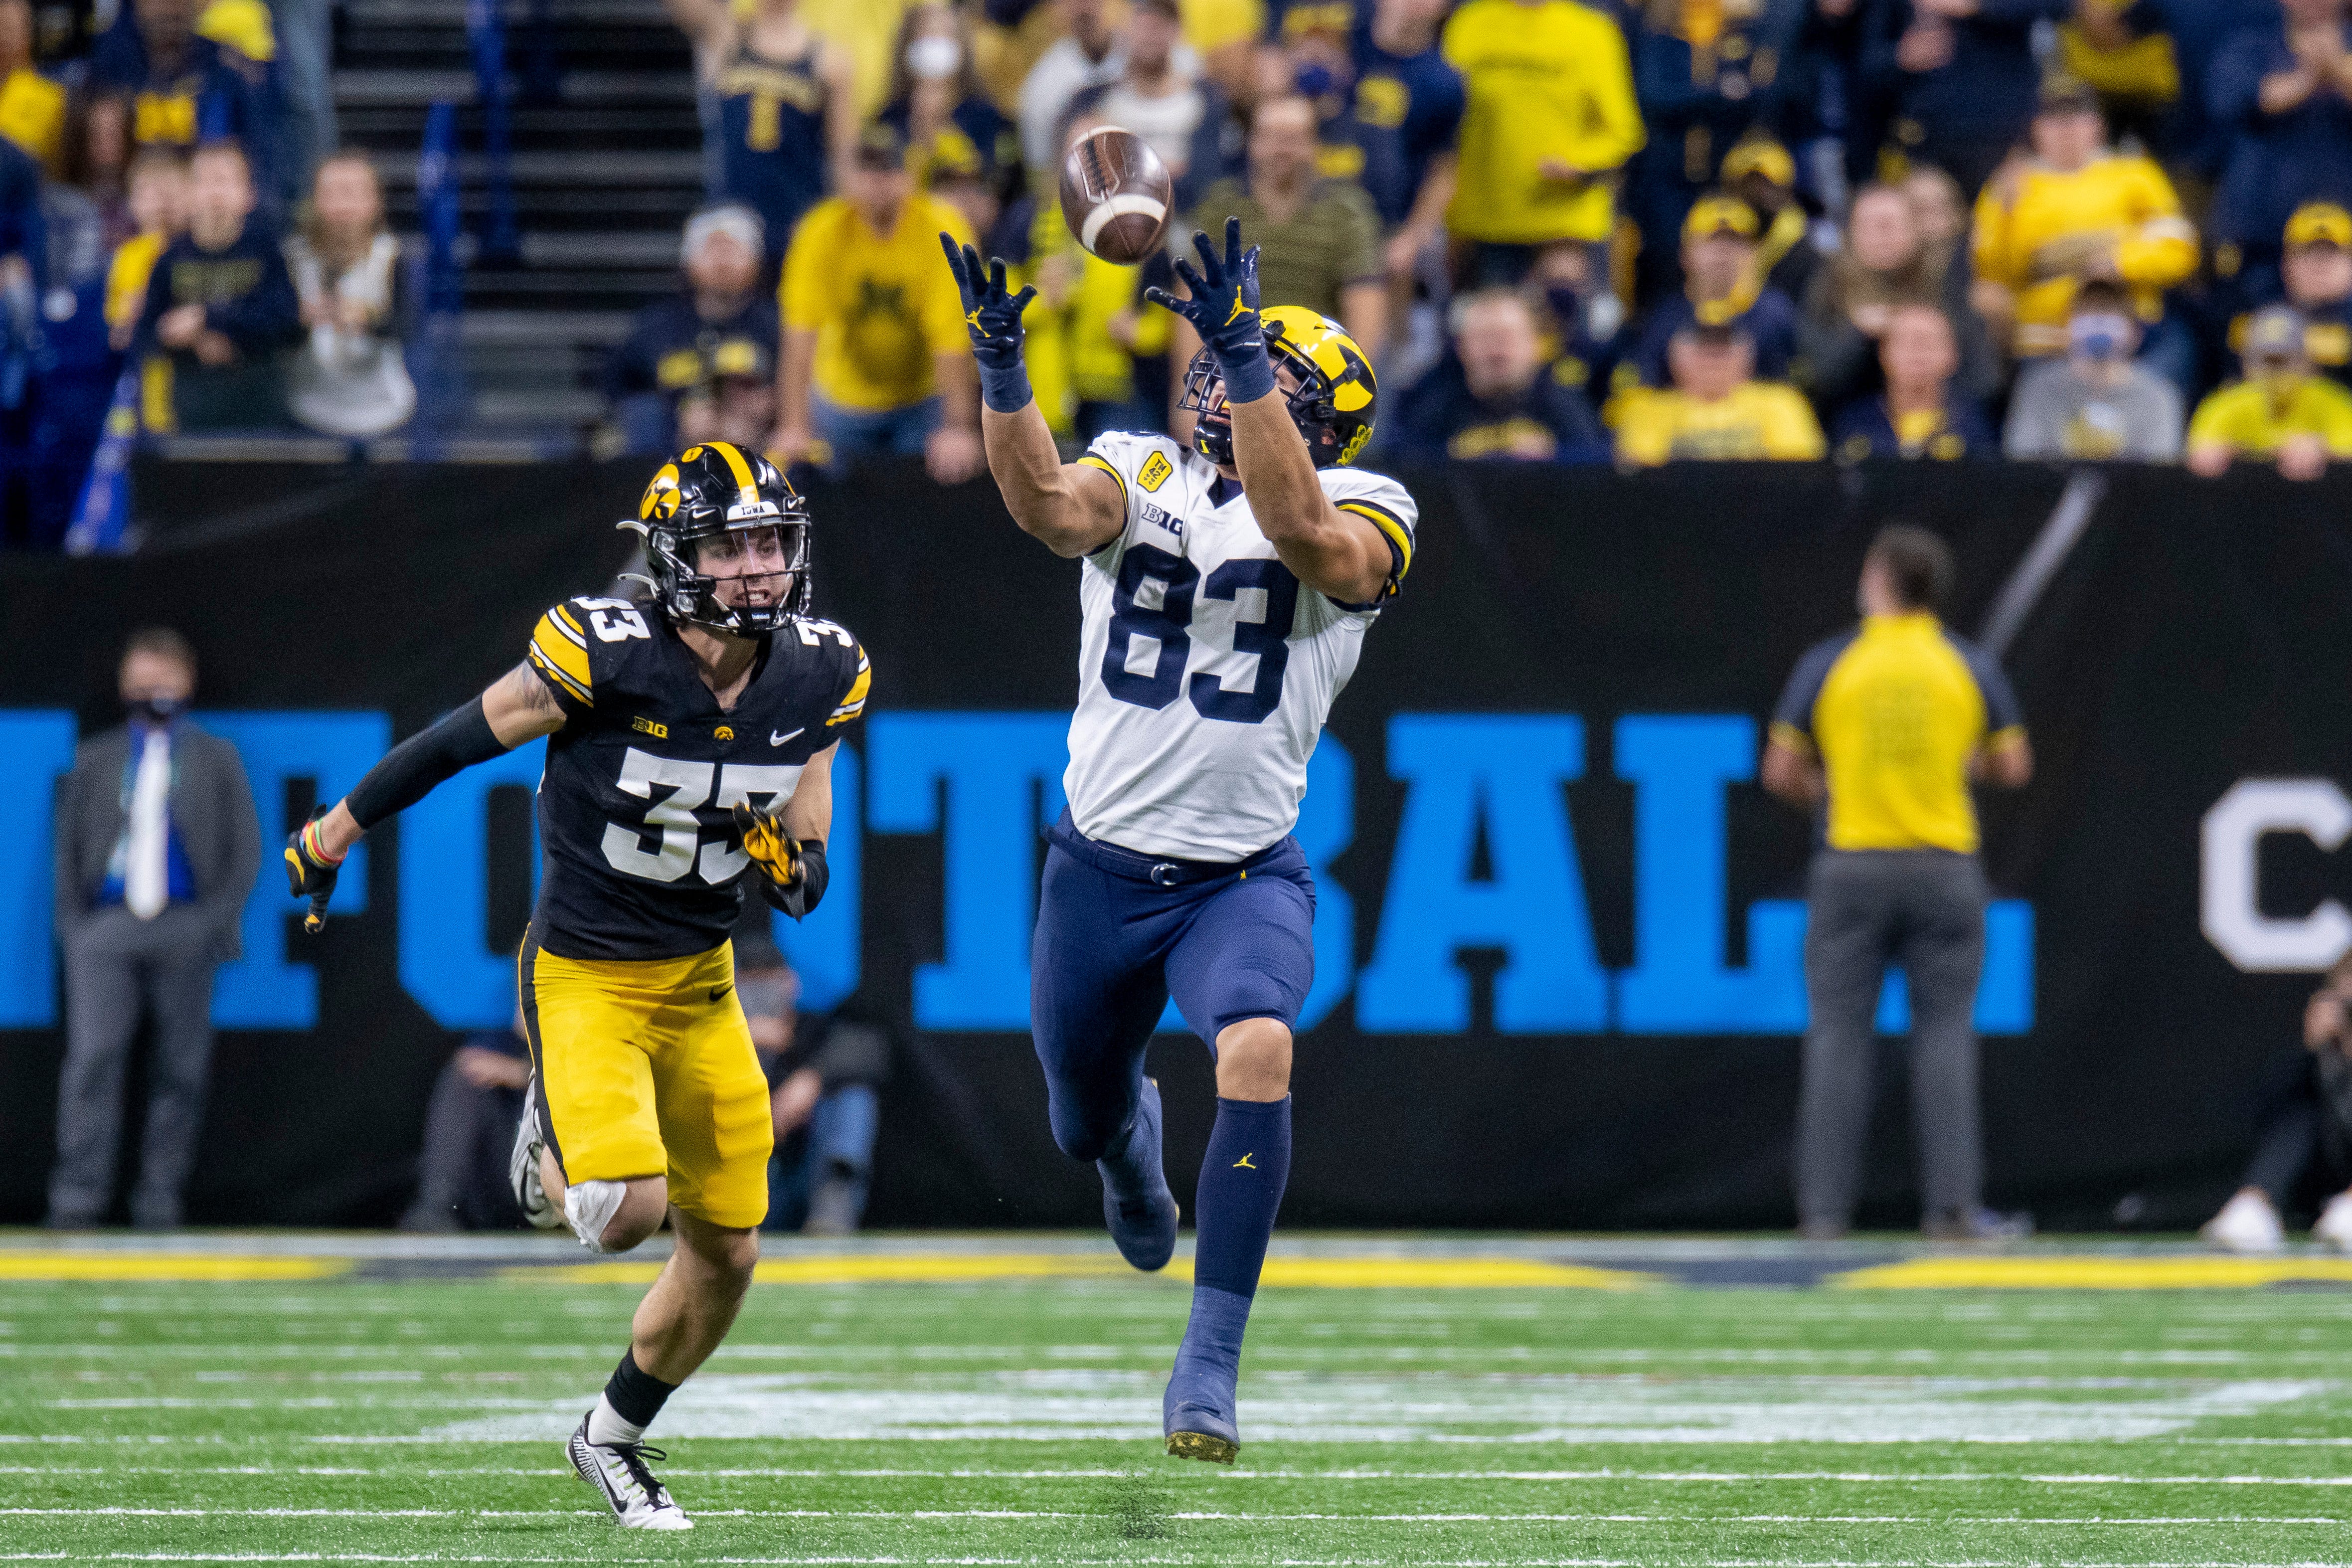 Michigan tight end Erick All catches a pass for a 38-yard gain during the fourth quarter.